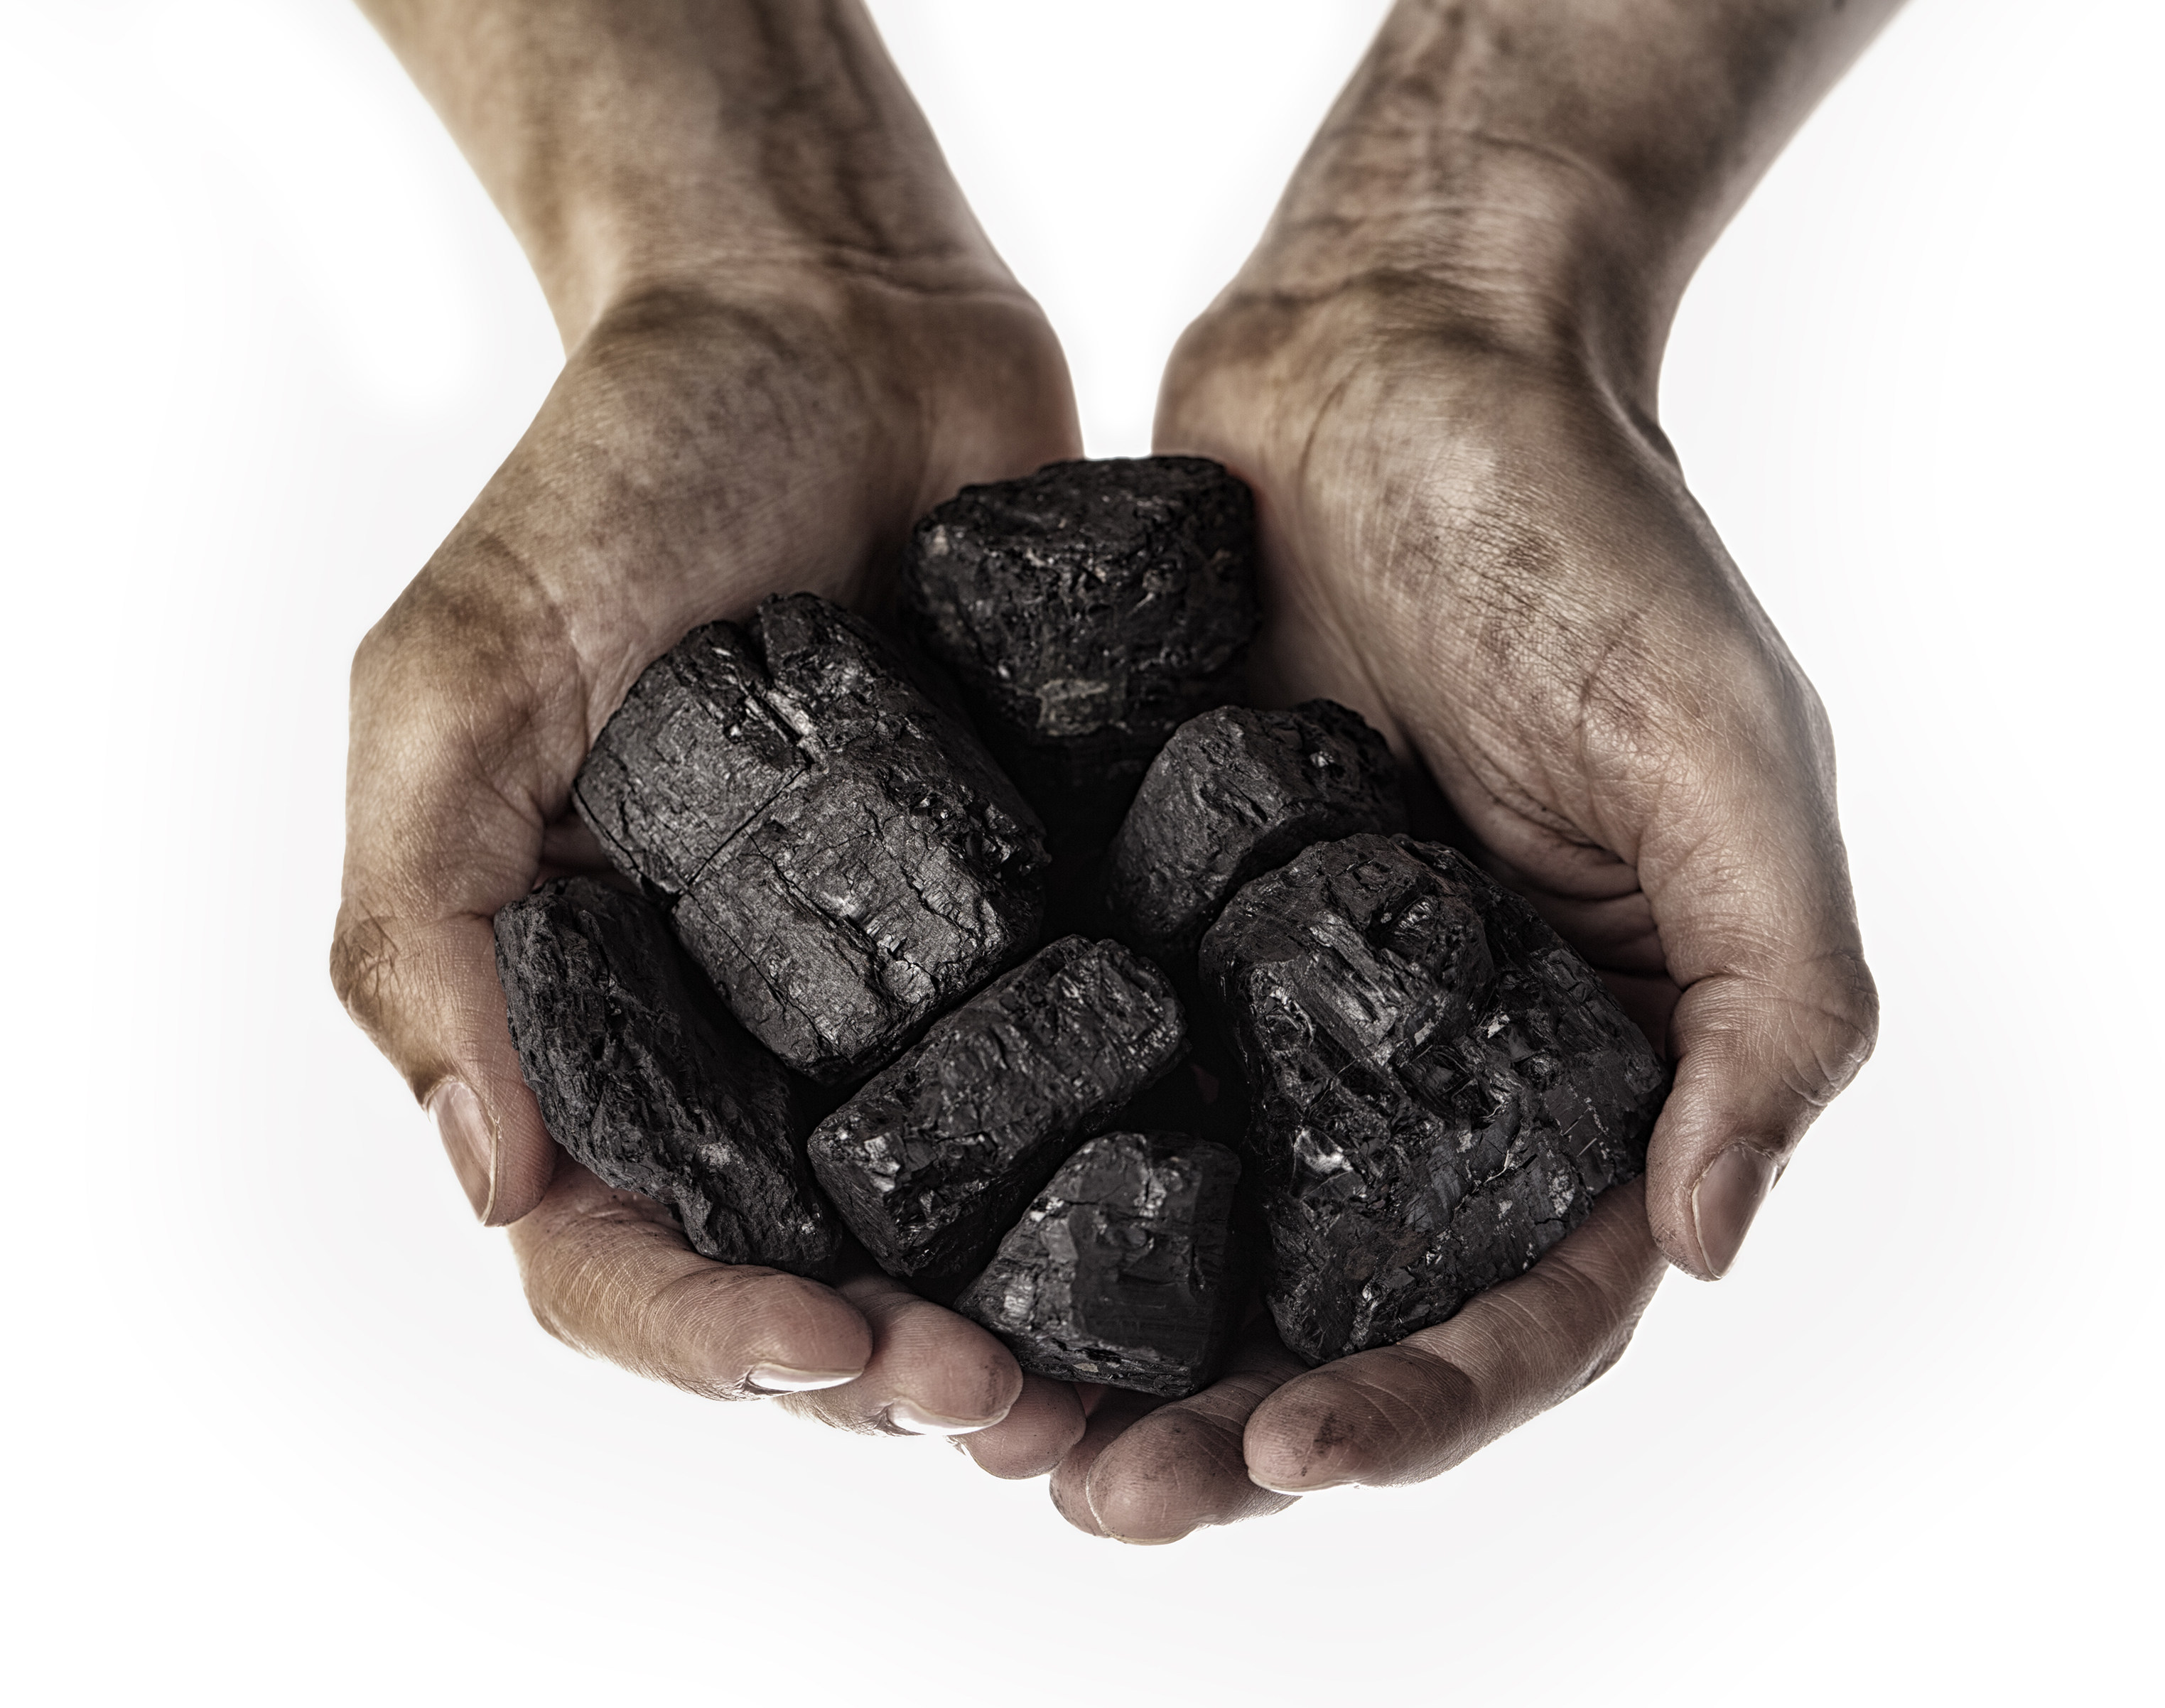 Chinese scientists have developed a low-cost method of converting coal into protein for use in animal feed. Photo: Shutterstock